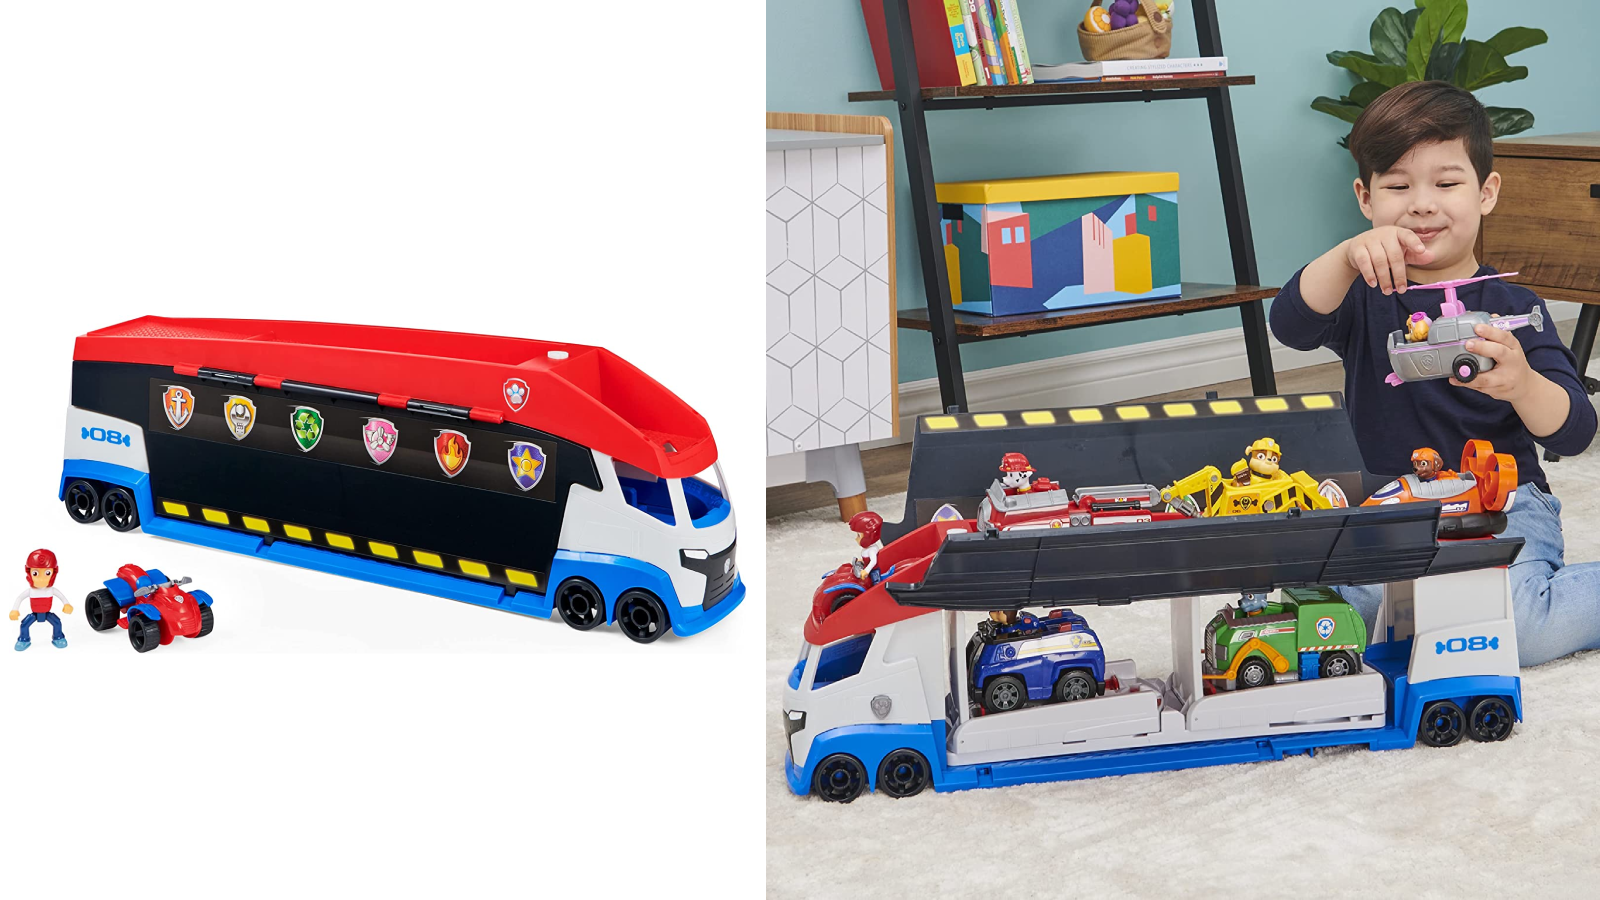 skjorte salt Ydmyg 20 new Paw Patrol toys and gifts for 2021 you can get on Amazon